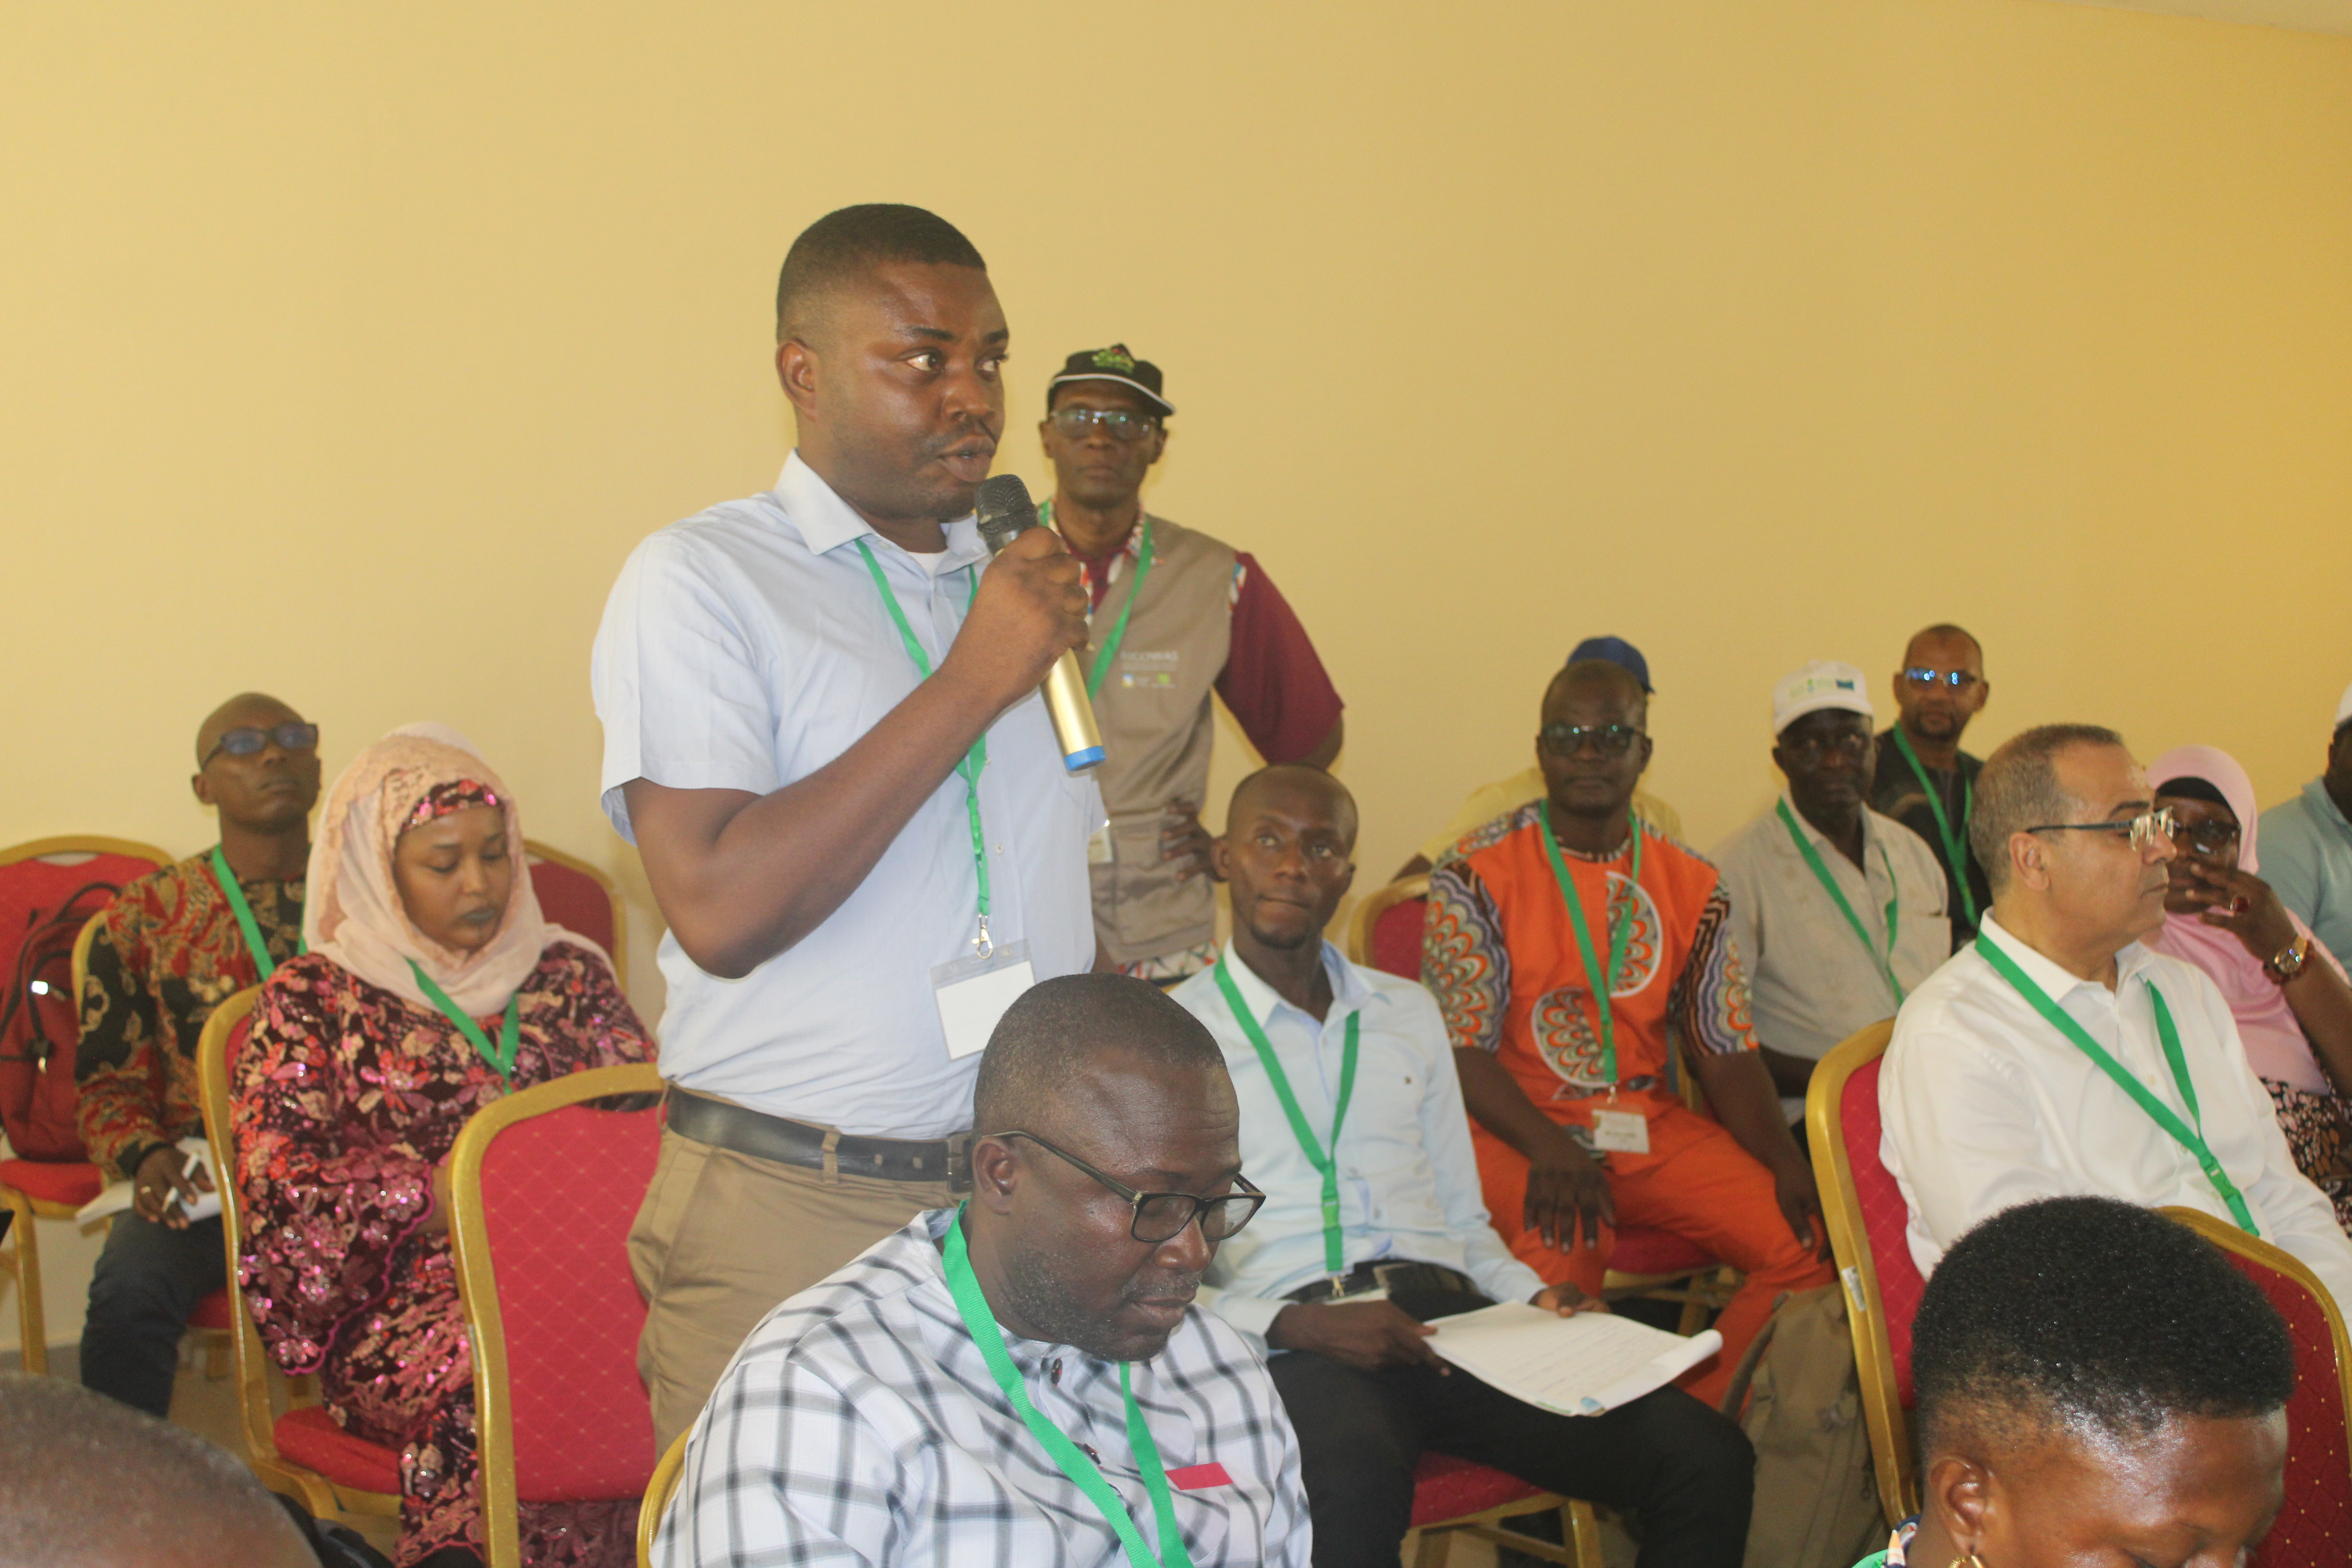 Regional training of trainers’ workshop is being held at the Agricultural Mechanization Training Centre in Grand Lahou, Cote d'Ivoir